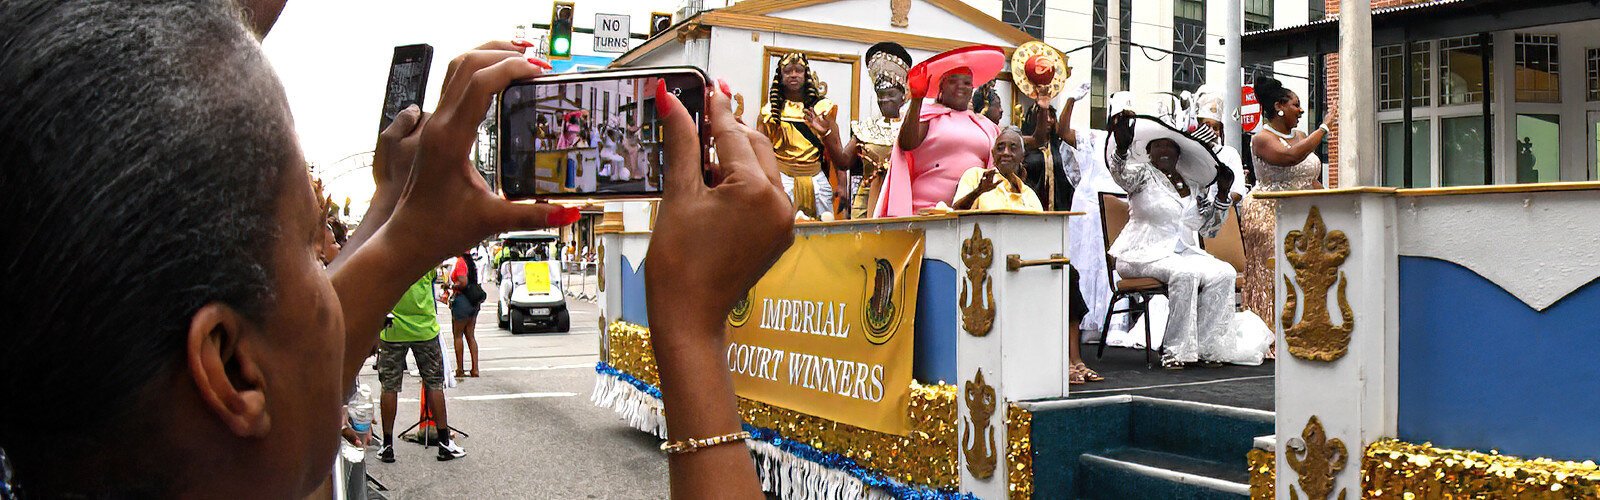 The parade is a major highlight of the 2023 AEAONMS Imperial Convention, which was held this year in Tampa from August 18 to 24th and expected to bring some 12,000 attendees and their family members to the city.